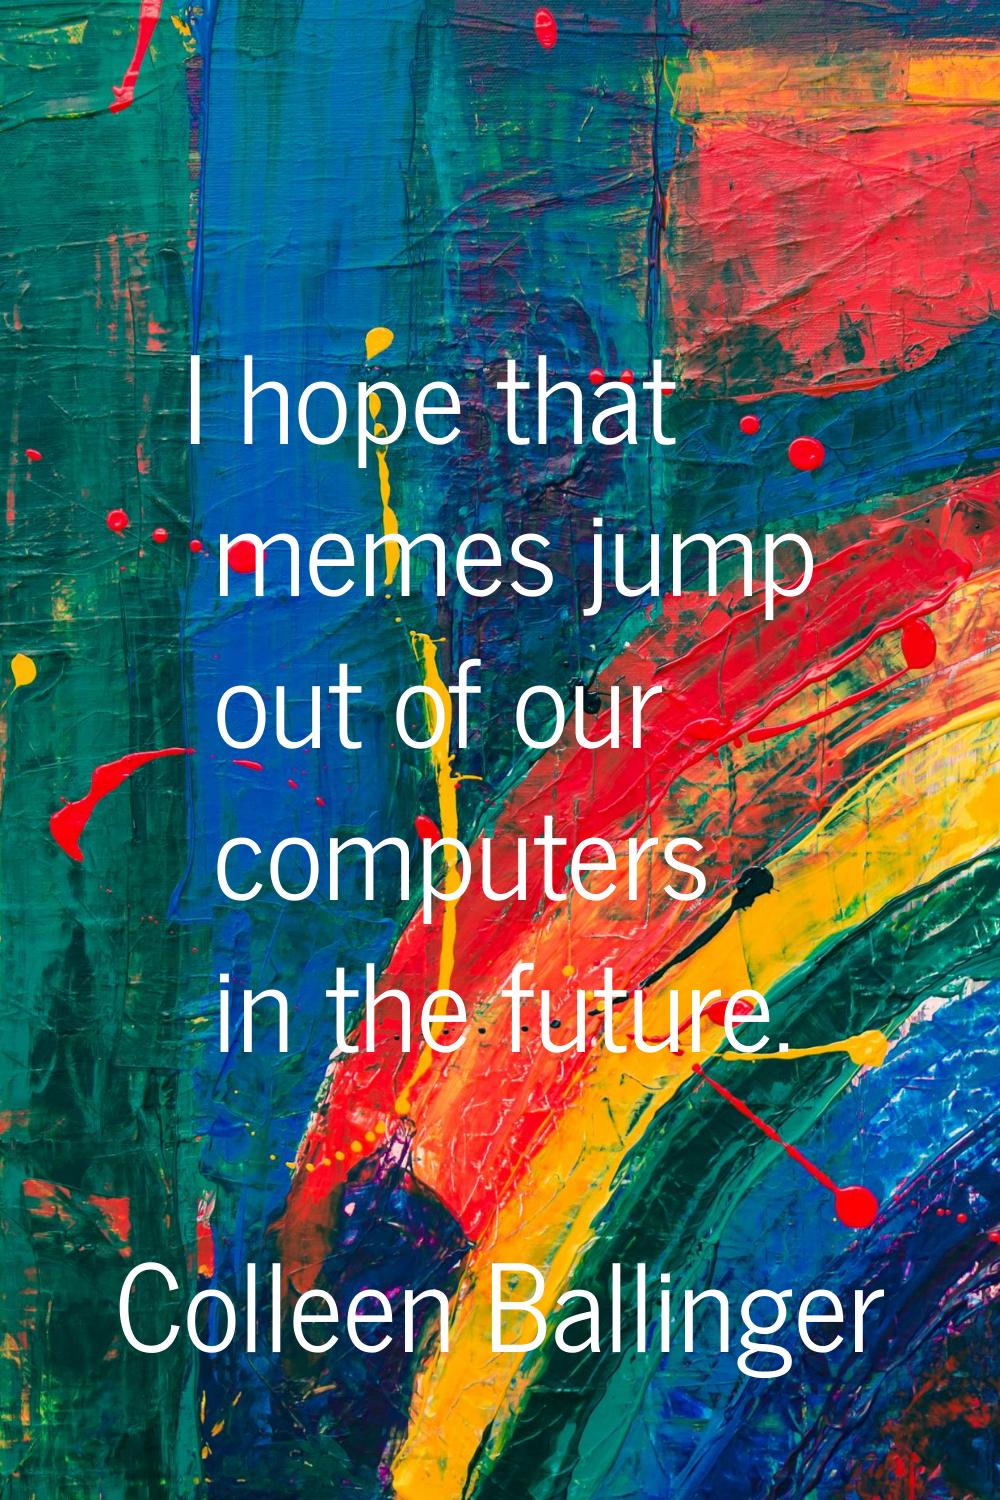 I hope that memes jump out of our computers in the future.